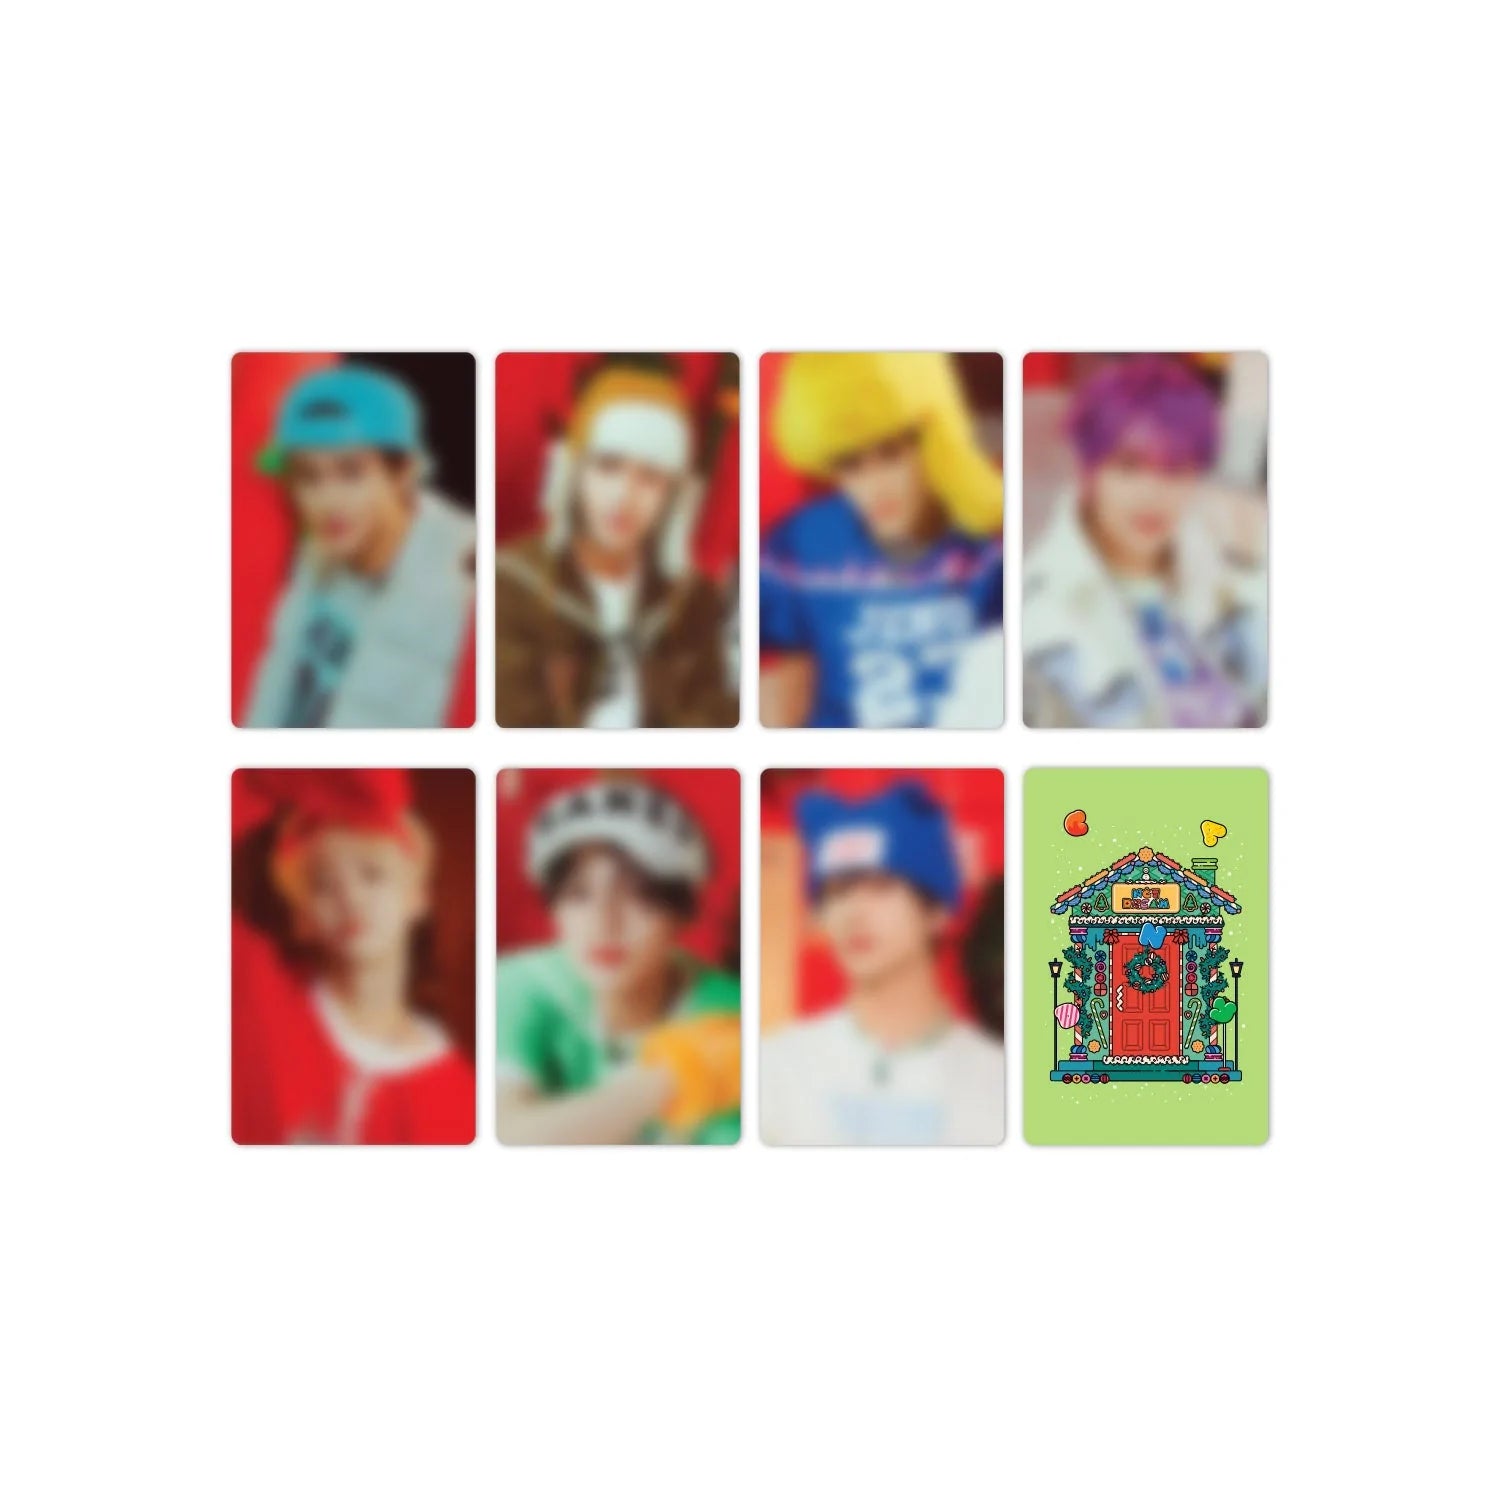 [SGS] NCT DREAM Winter Special Mini 'Candy' Waffle Indoor Slippers + 1 SGS Exclusive Photo Card